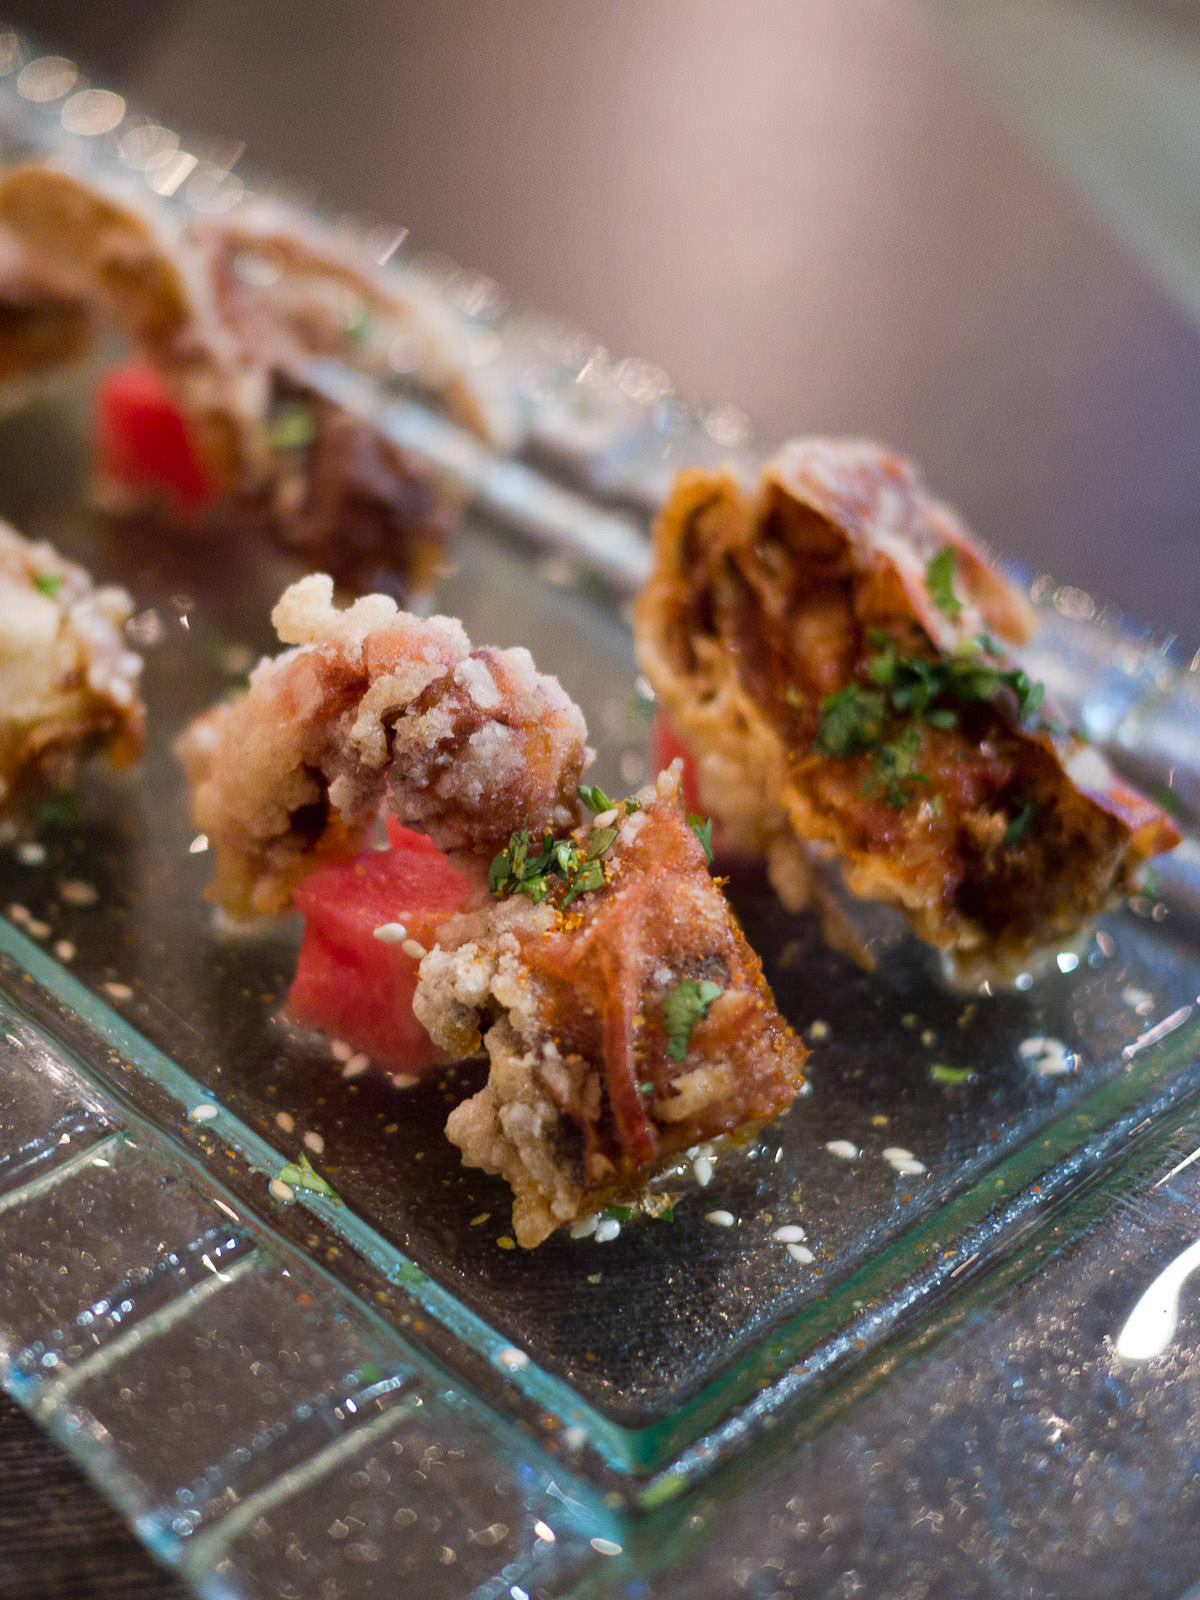 Soft shell crab with water melon